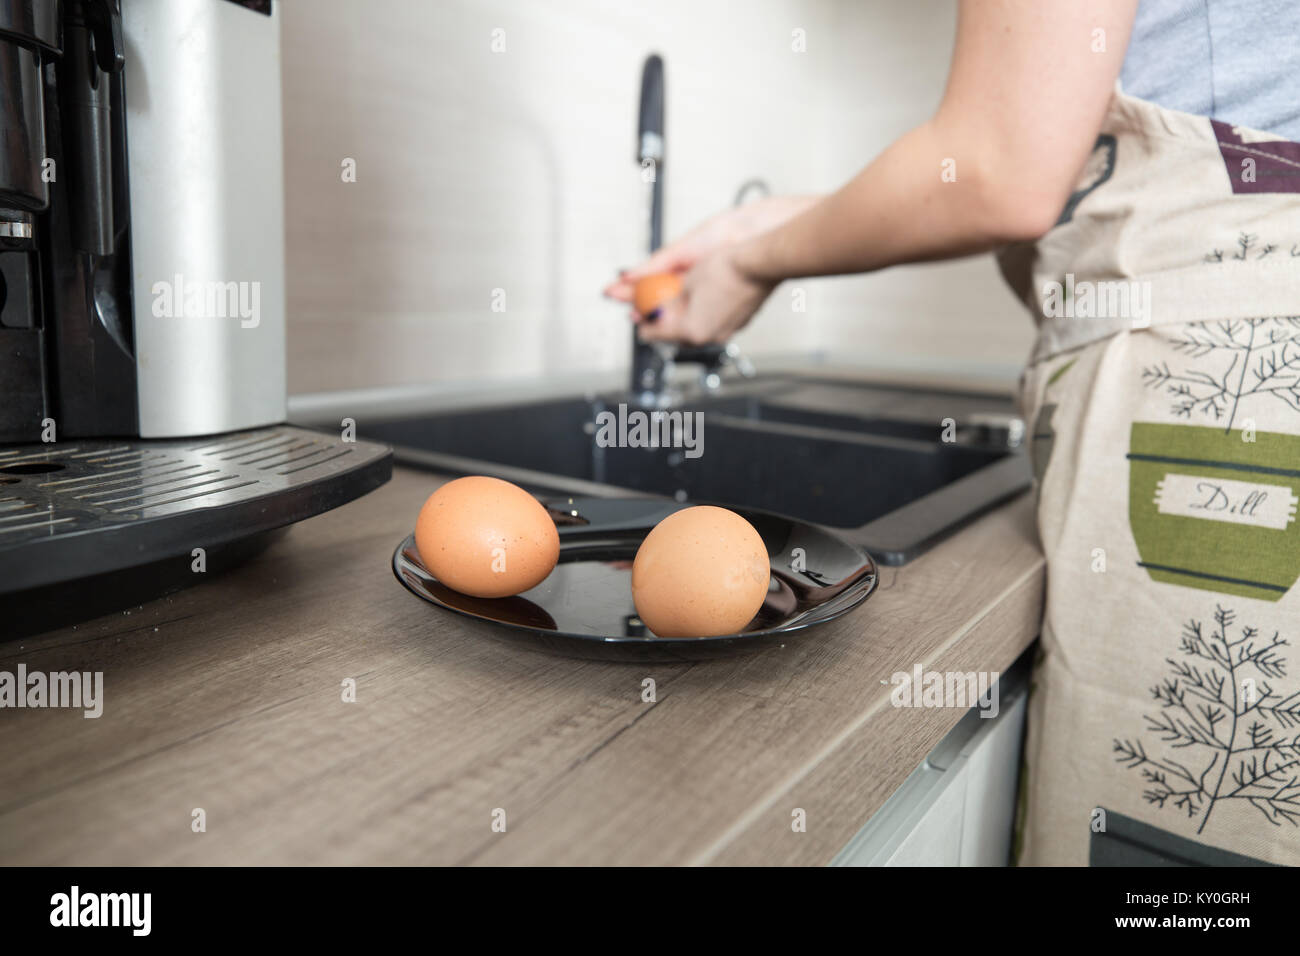 Eggs on plate at kitchen. Eggs for cooking cake. Stock Photo